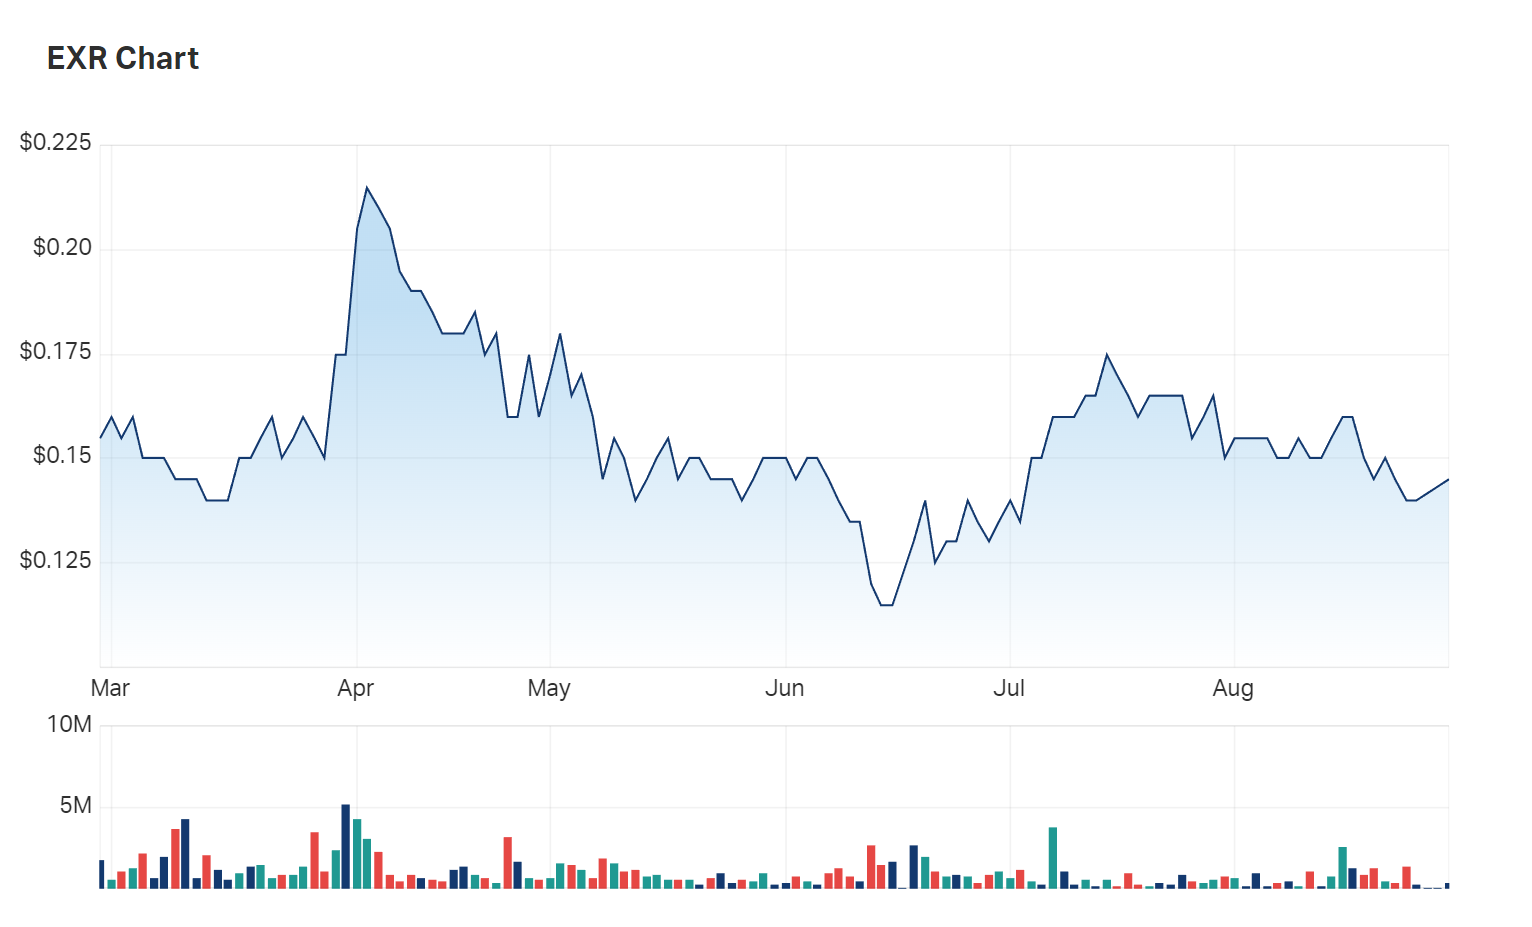 Elixir's six month charts show the company was able to quickly shake off losses between June and July 